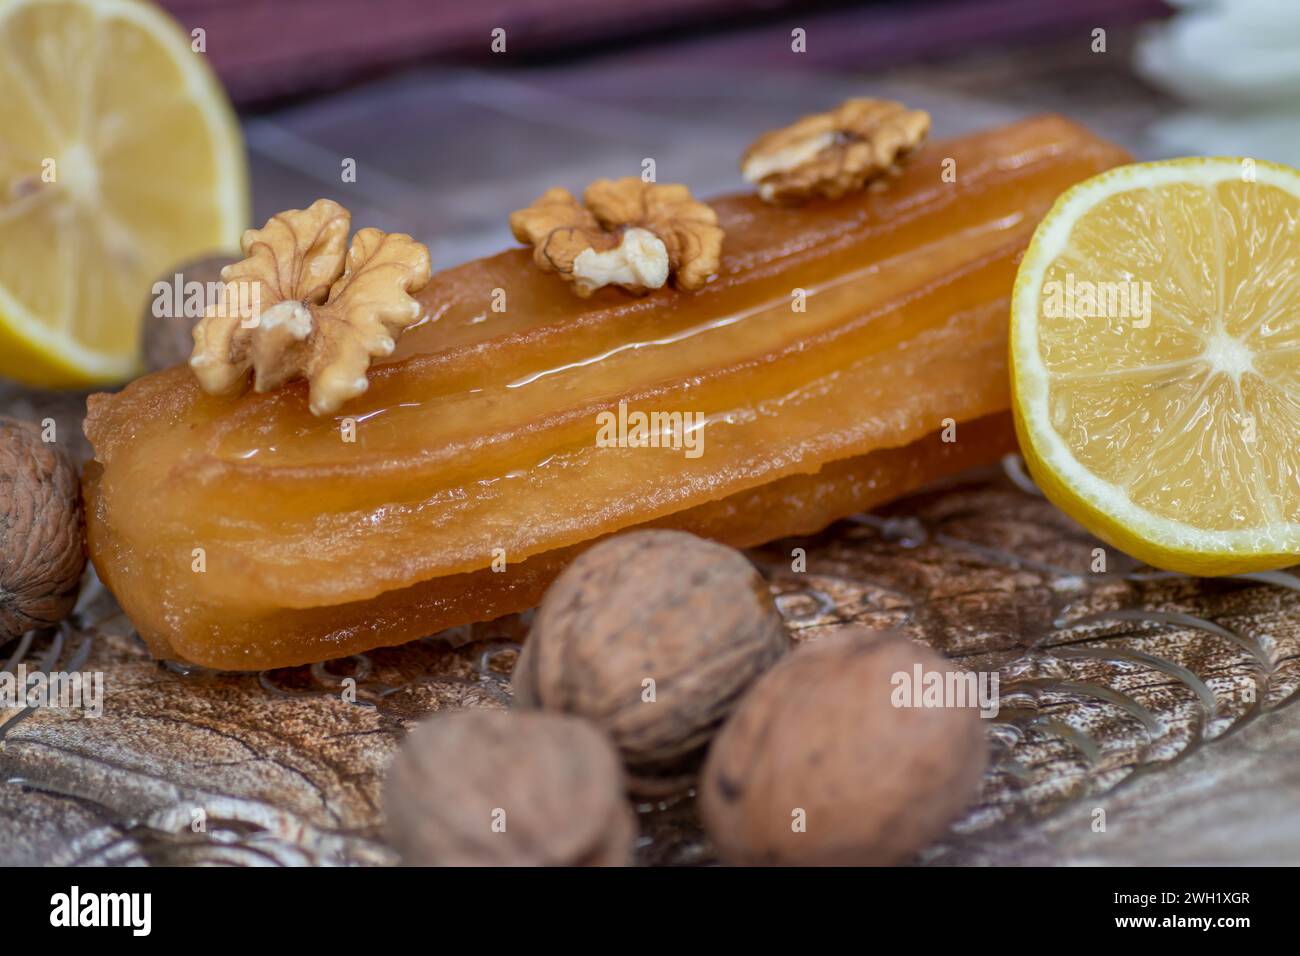 Turkish sweet cake called tulumba, served at plate with sliced of lemon and nuts around, on massive wooden table Stock Photo